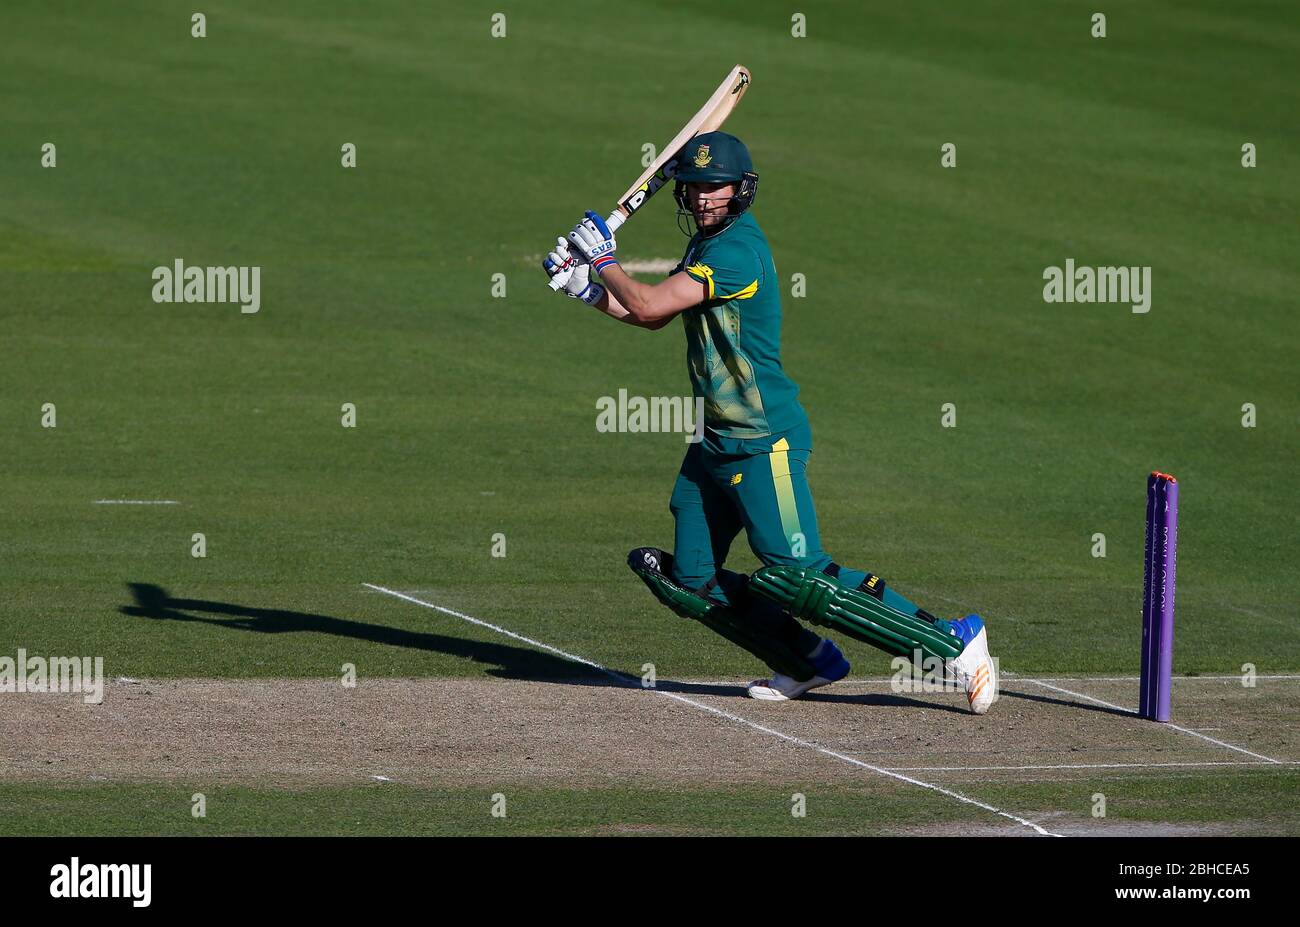 Wayne Parnell of South Africa batting during the Tour Match between Sussex and South Africa at The 1st Central County Ground in Hove. 19 May 2017 Stock Photo